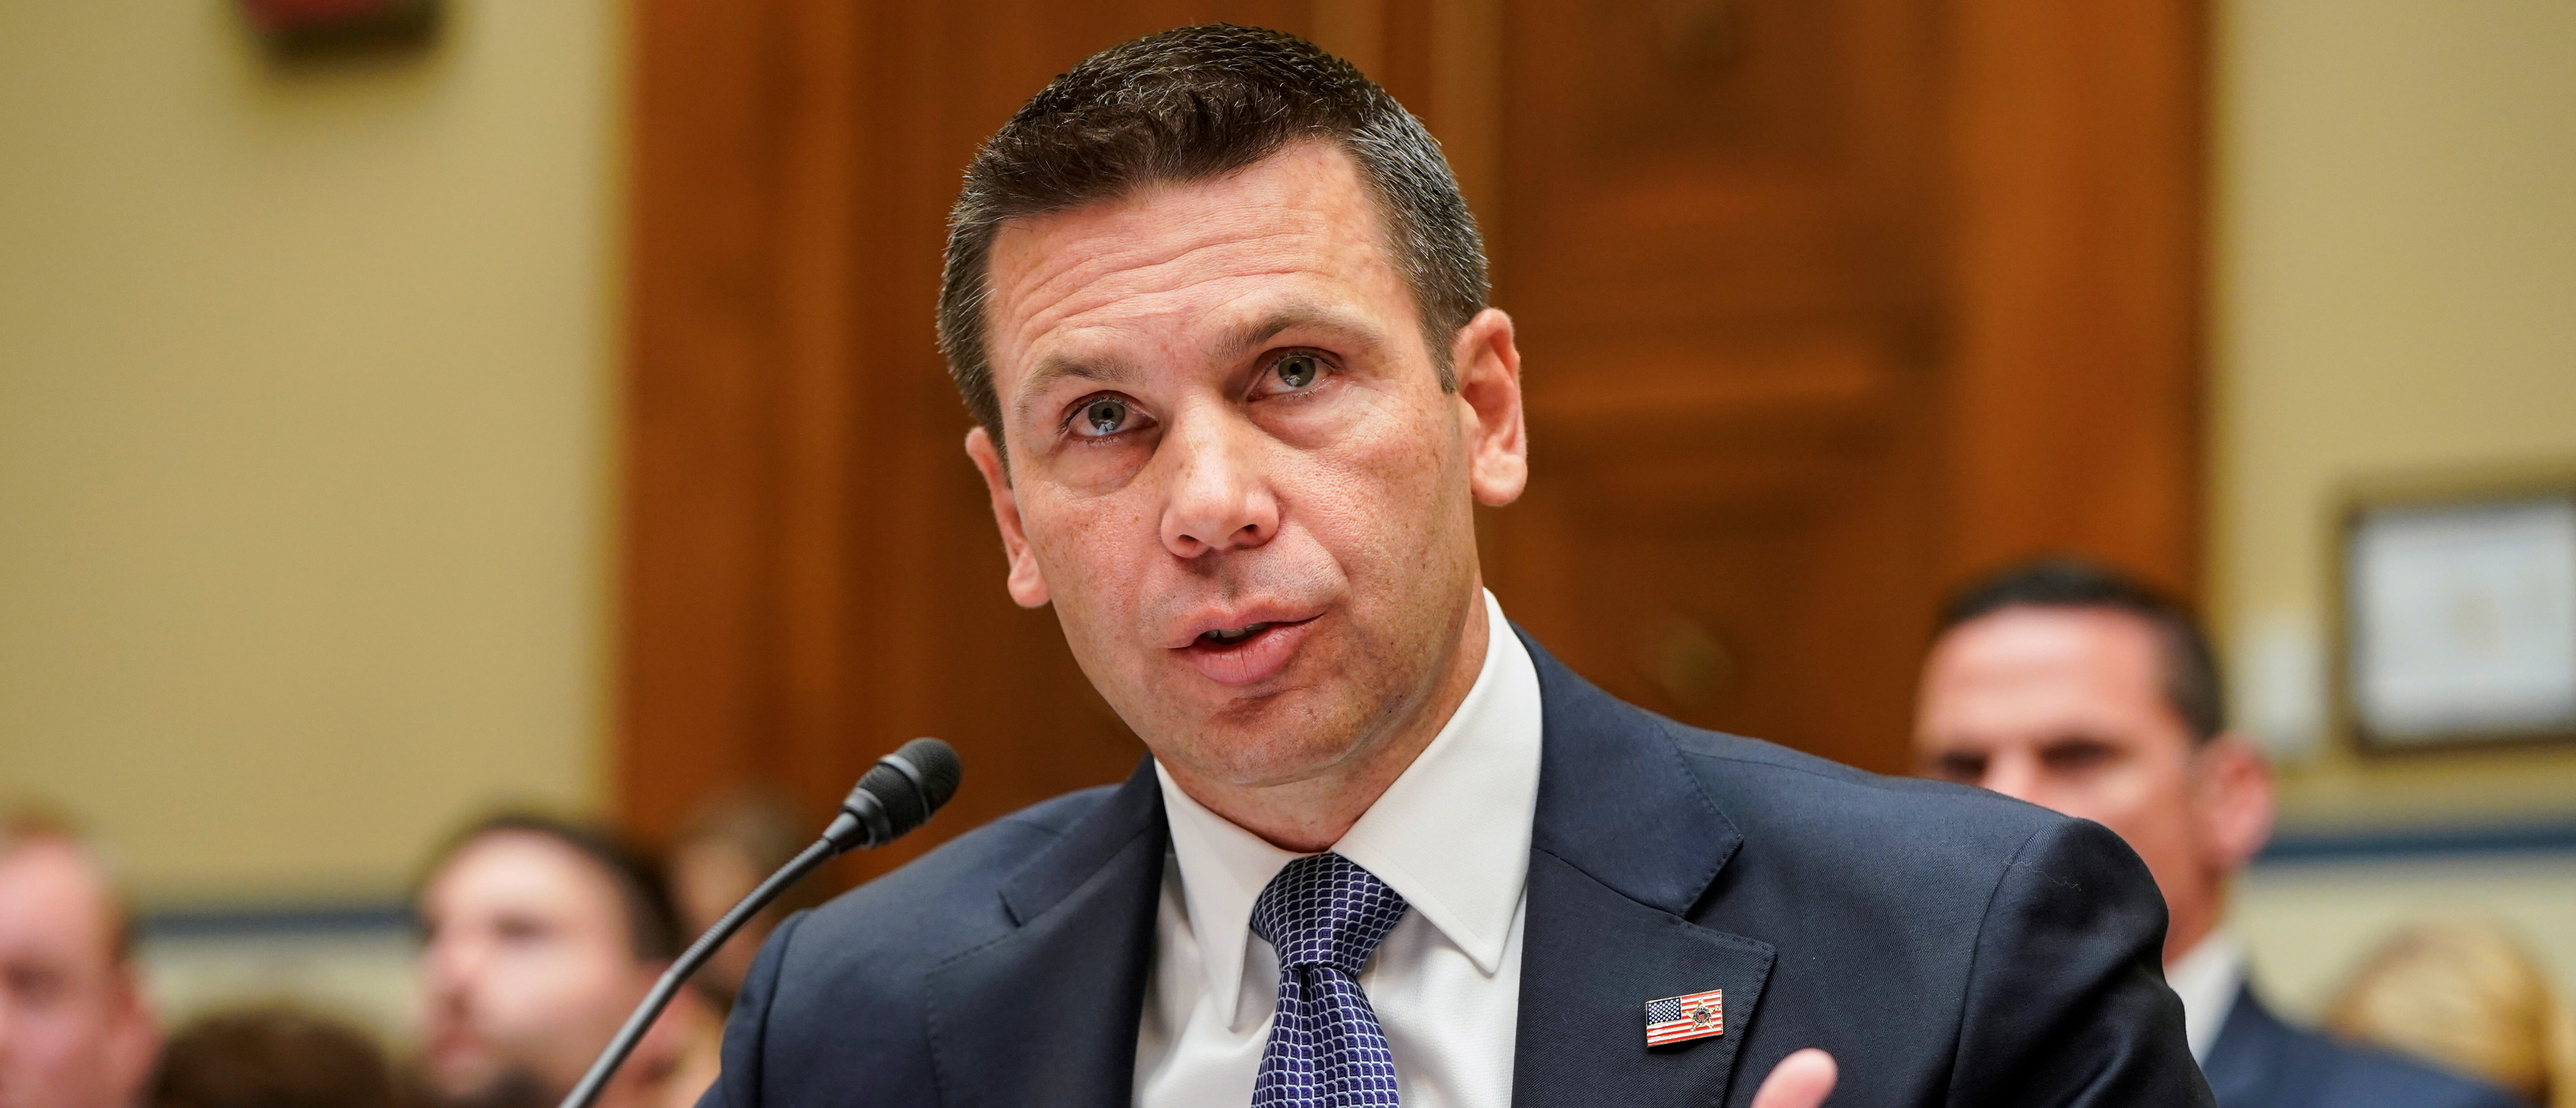 Acting Homeland Security Secretary Kevin McAleenan testifies before the House Oversight and Reform Committee in Washington